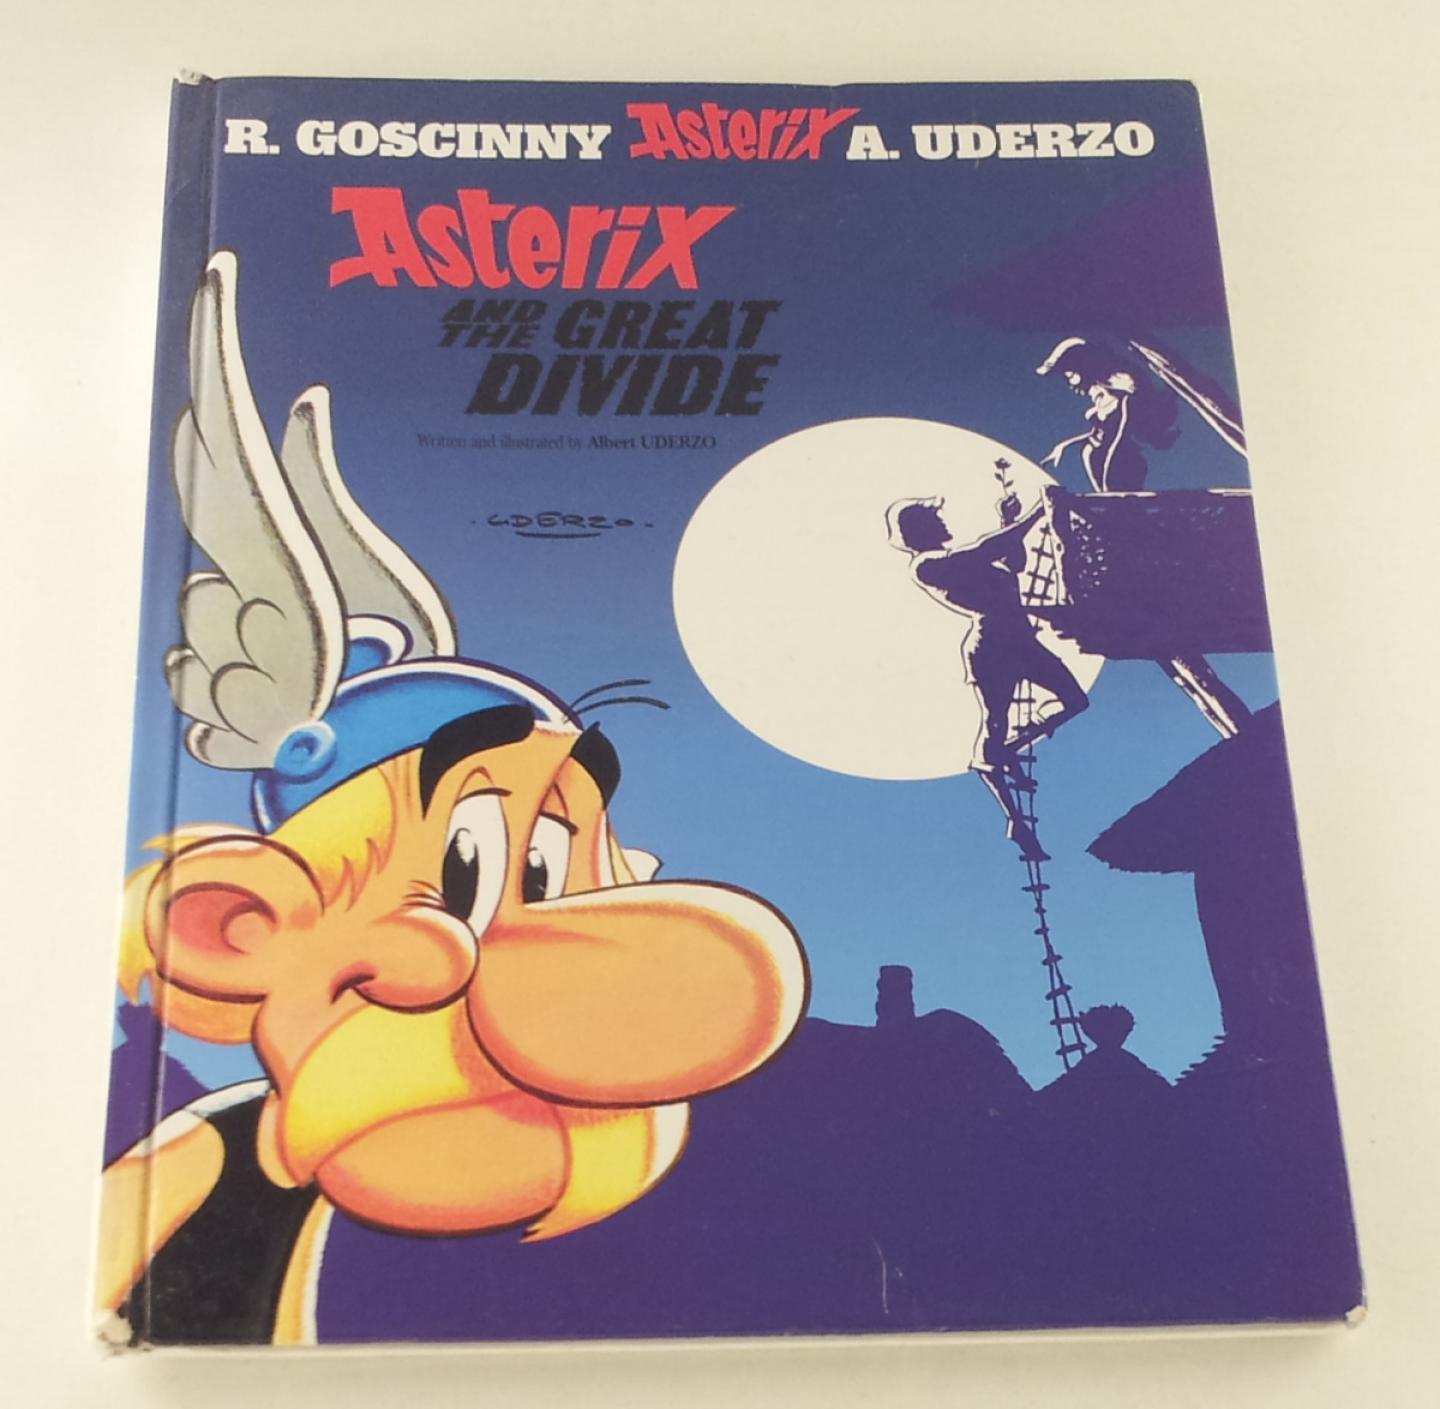 Goscinny, R. / Uderzo, A. - Asterix and the Great Divide